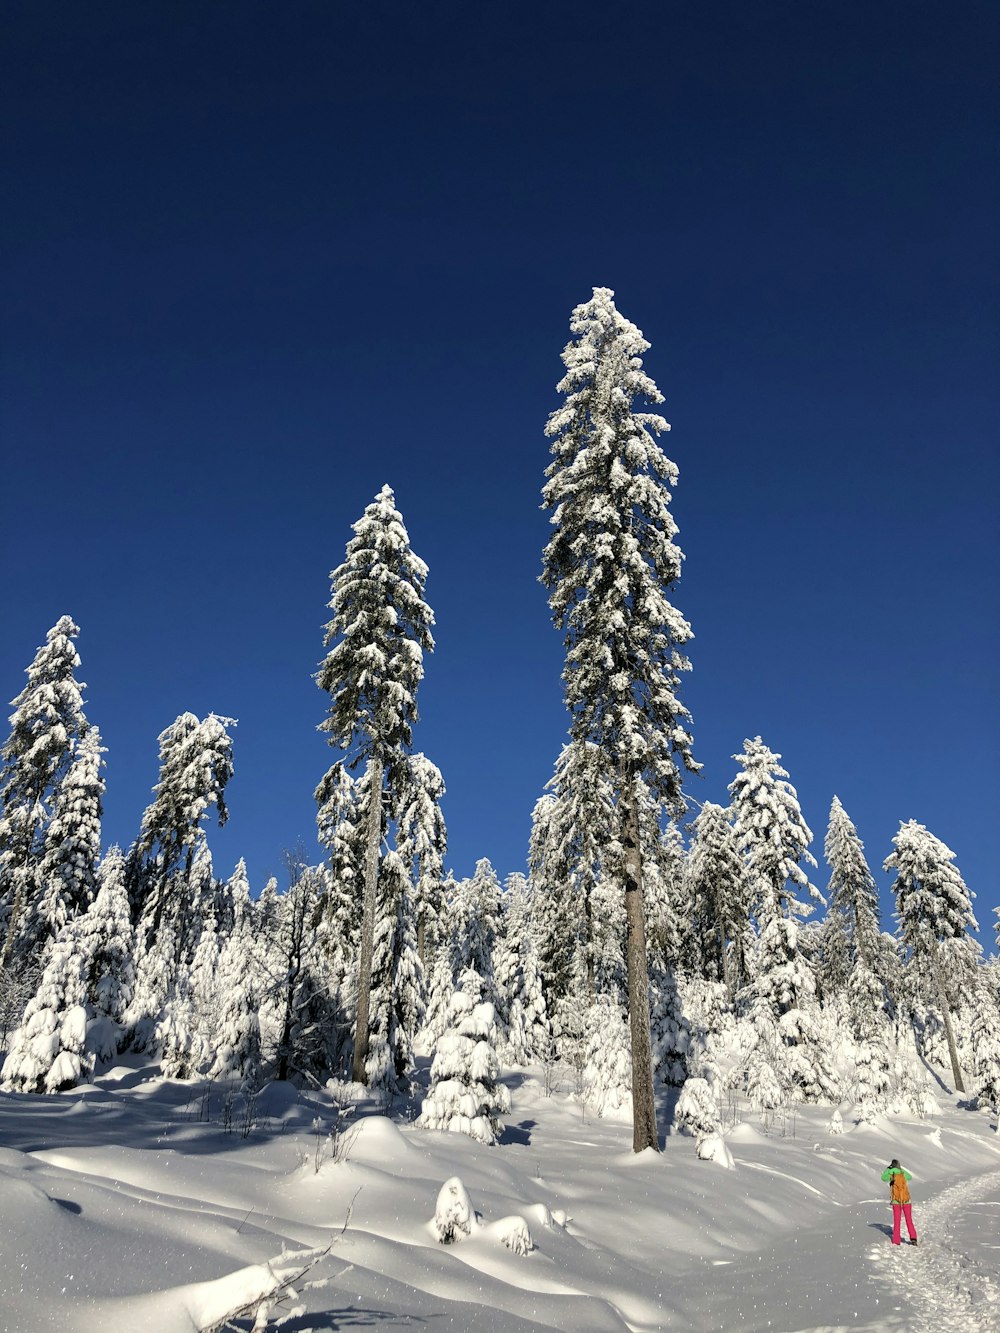 snow covered pine trees under blue sky during daytime